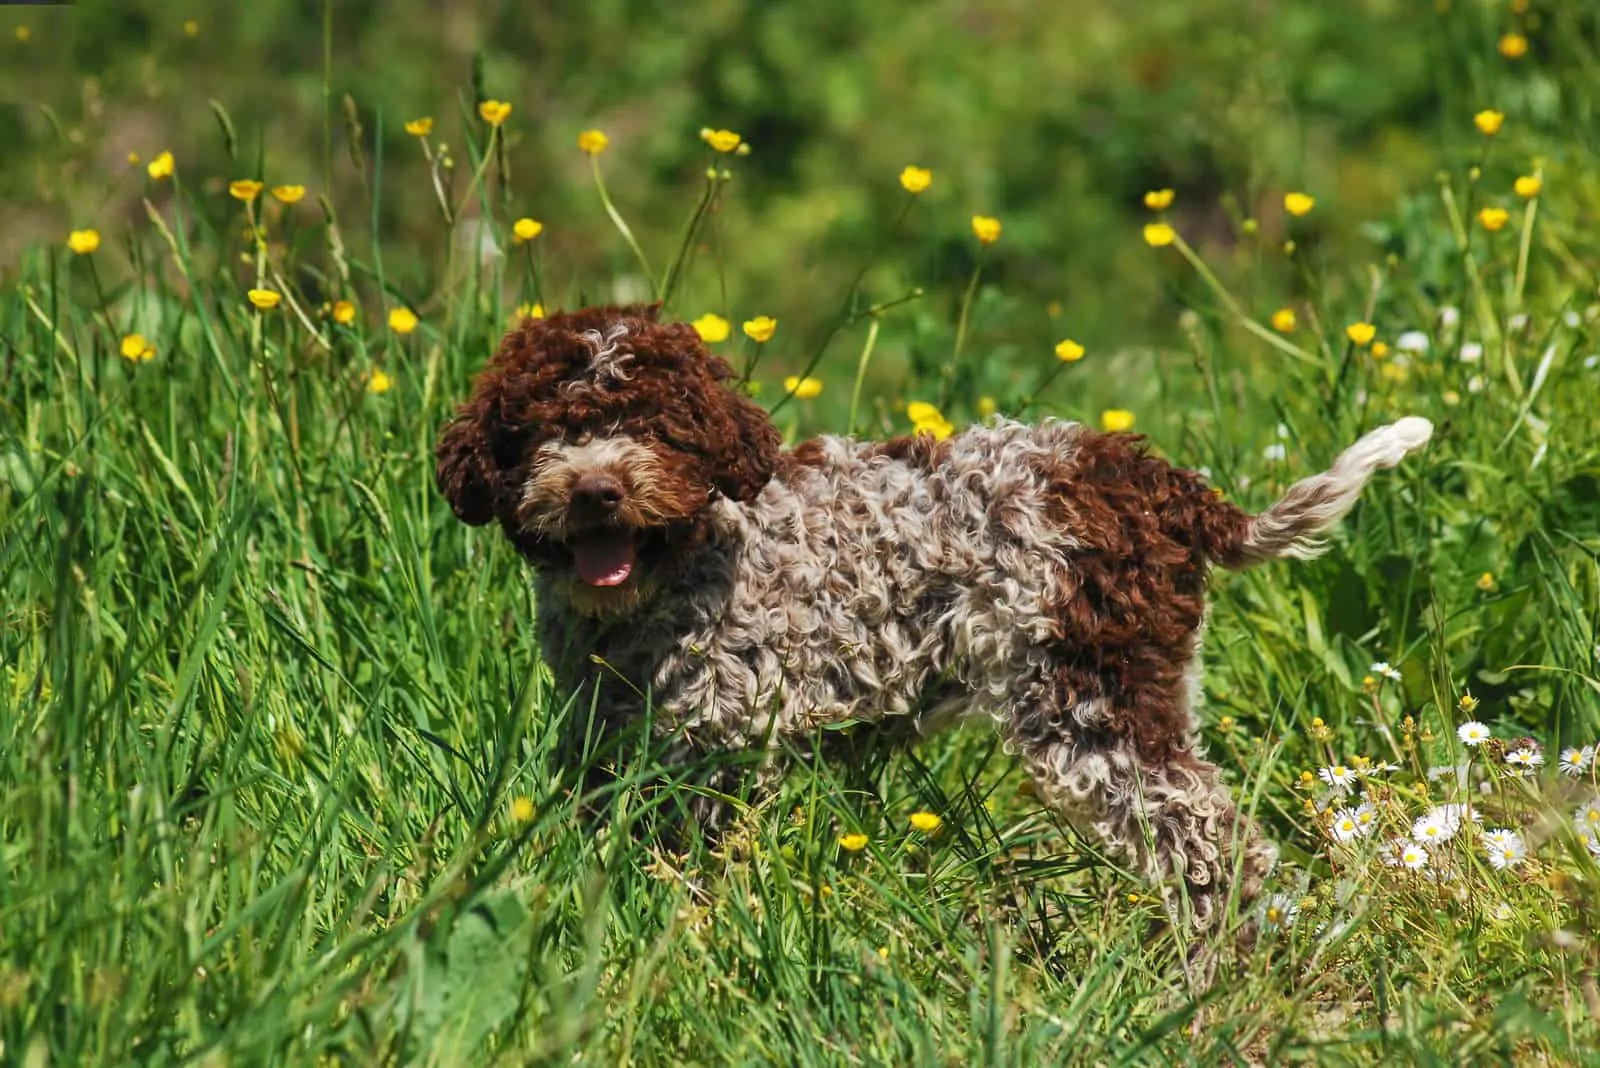 Lagotto Romagnolo puppy in the grass standing